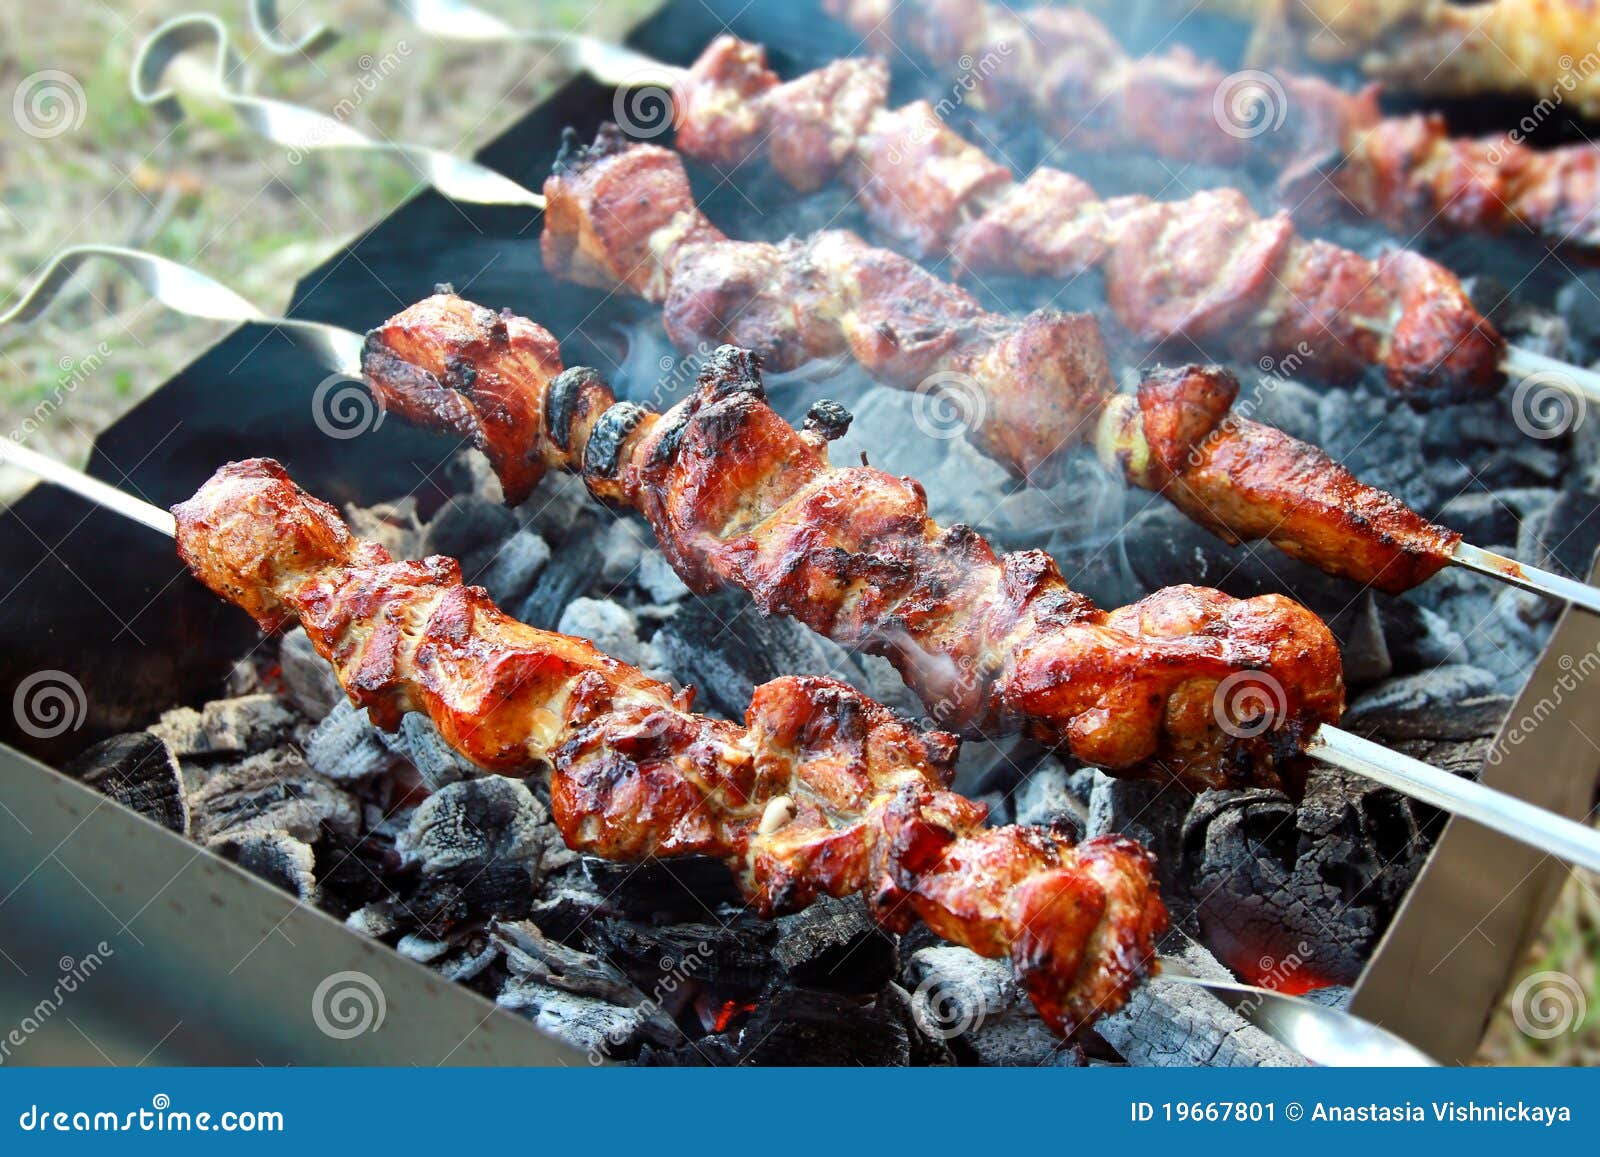 Grilled Barbecue Sticks Cooking Stock Image - Image: 19667801